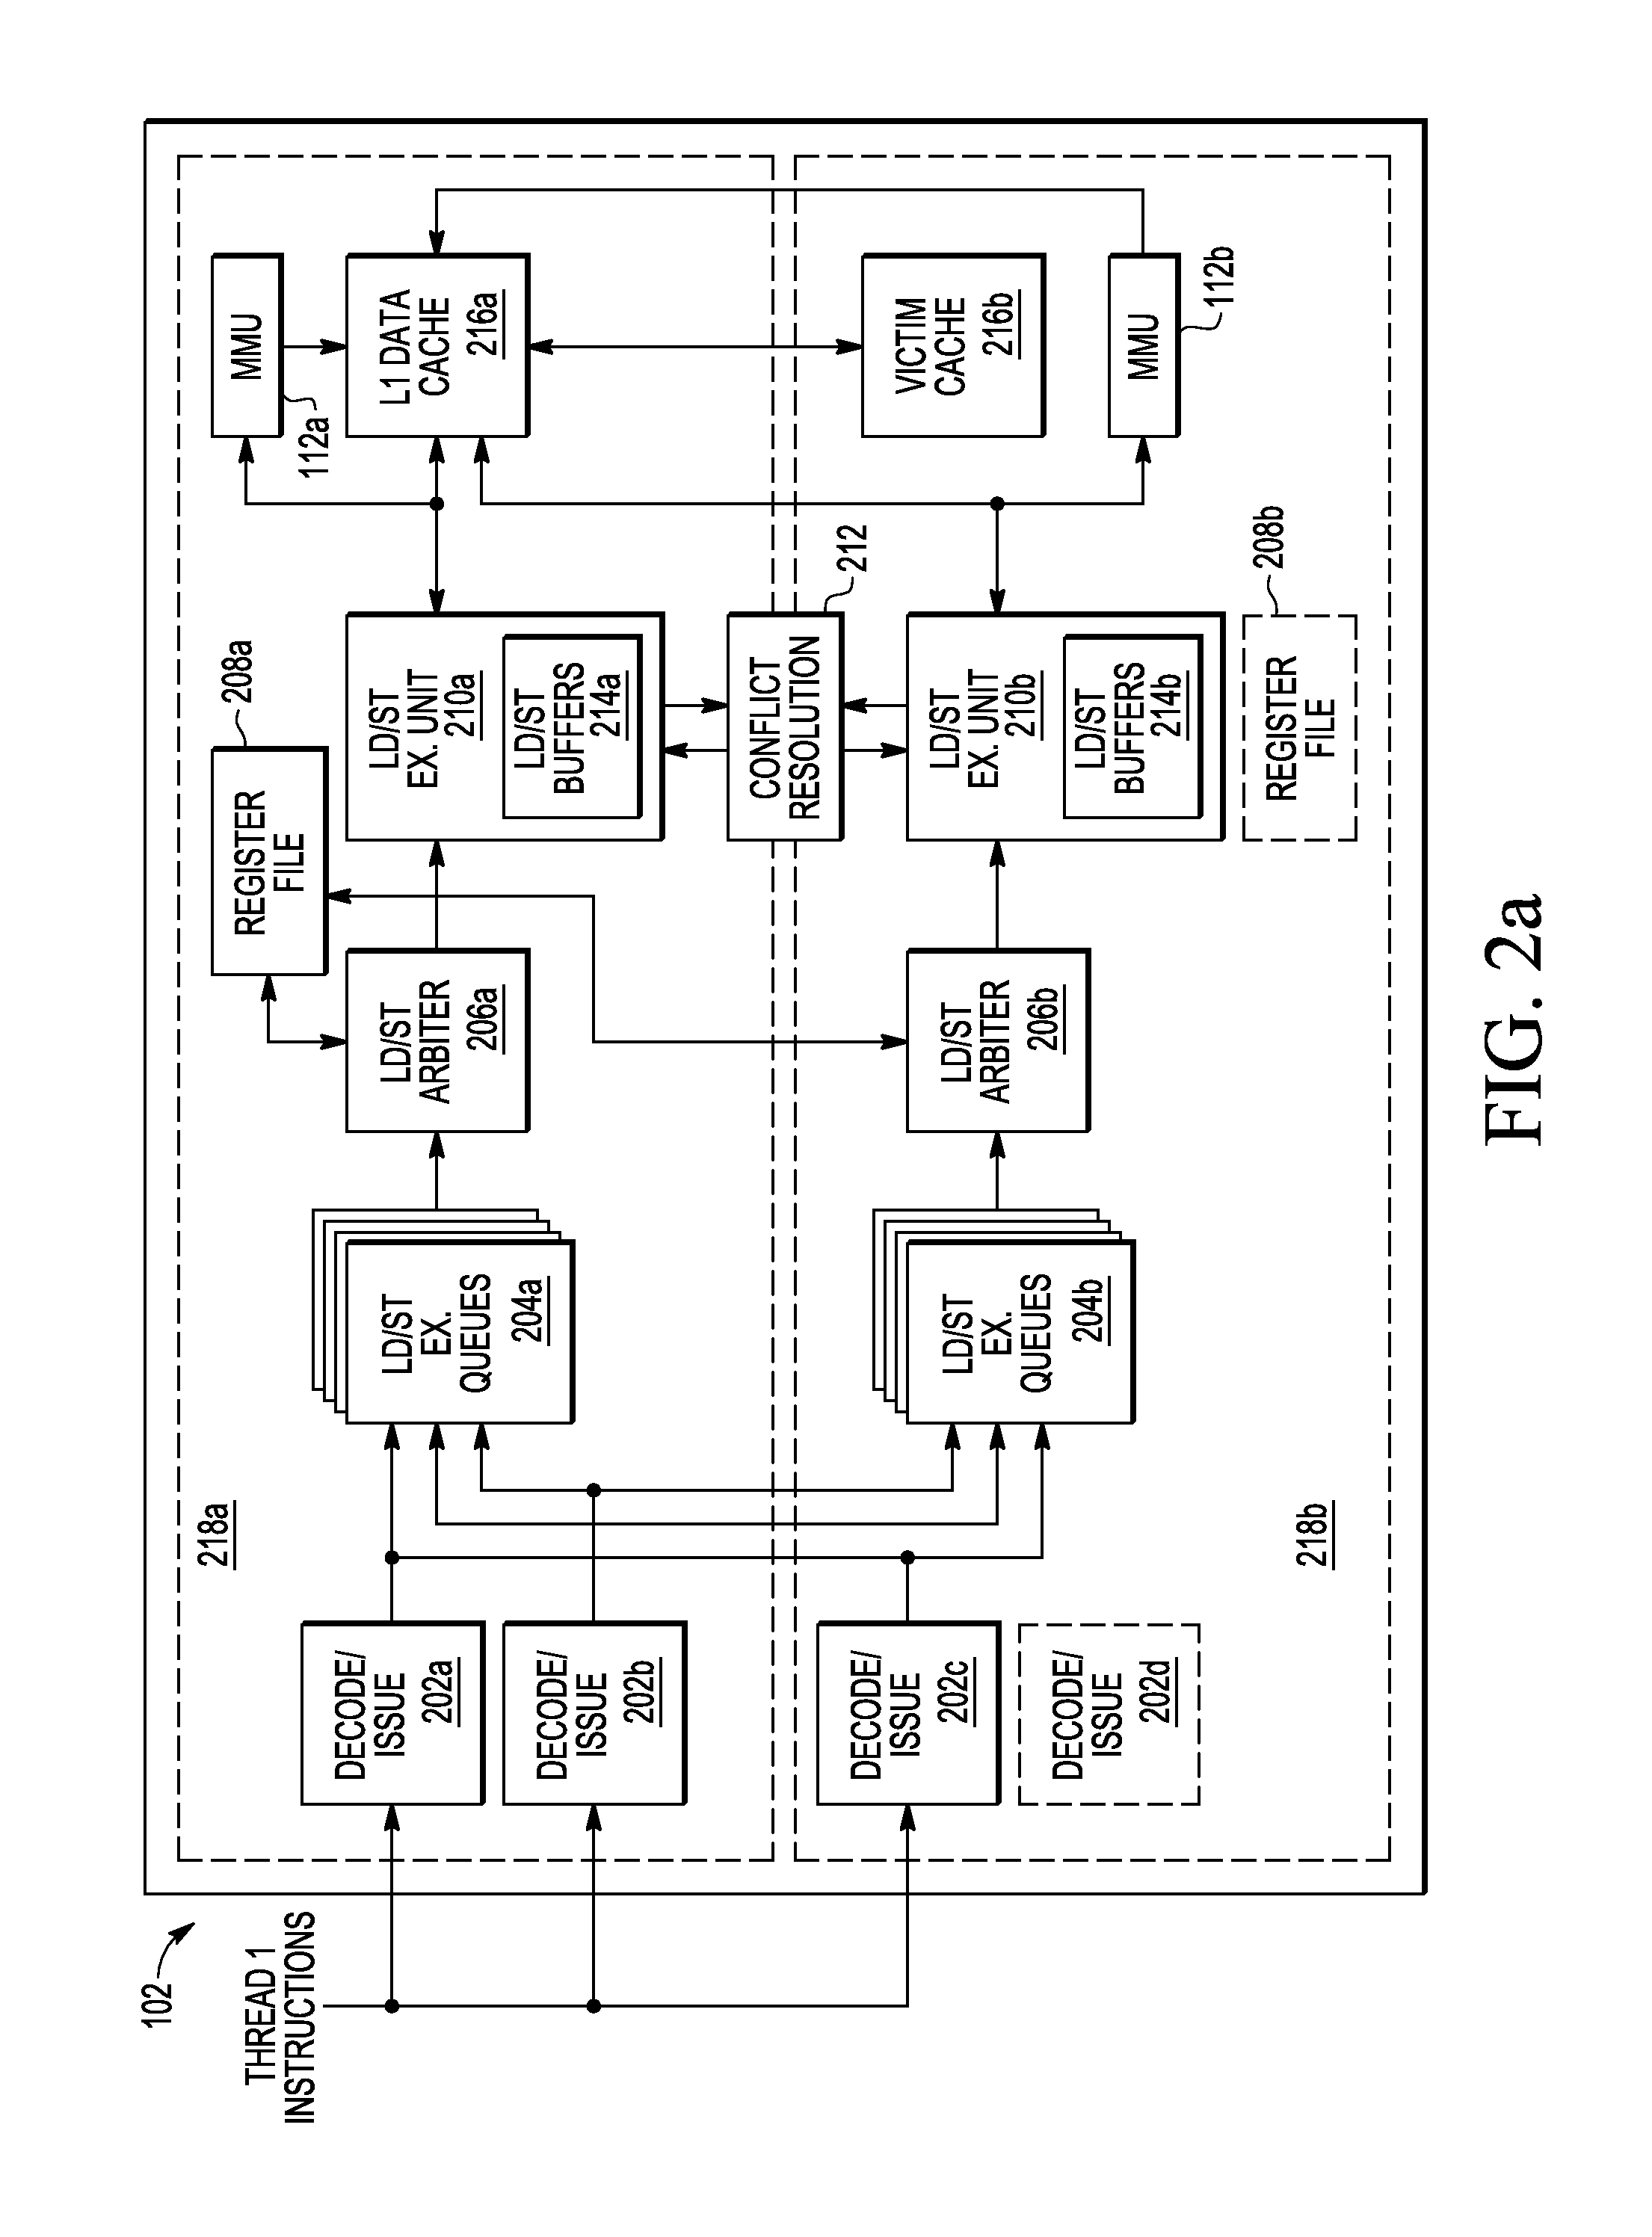 Systems and methods for configuring load/store execution units